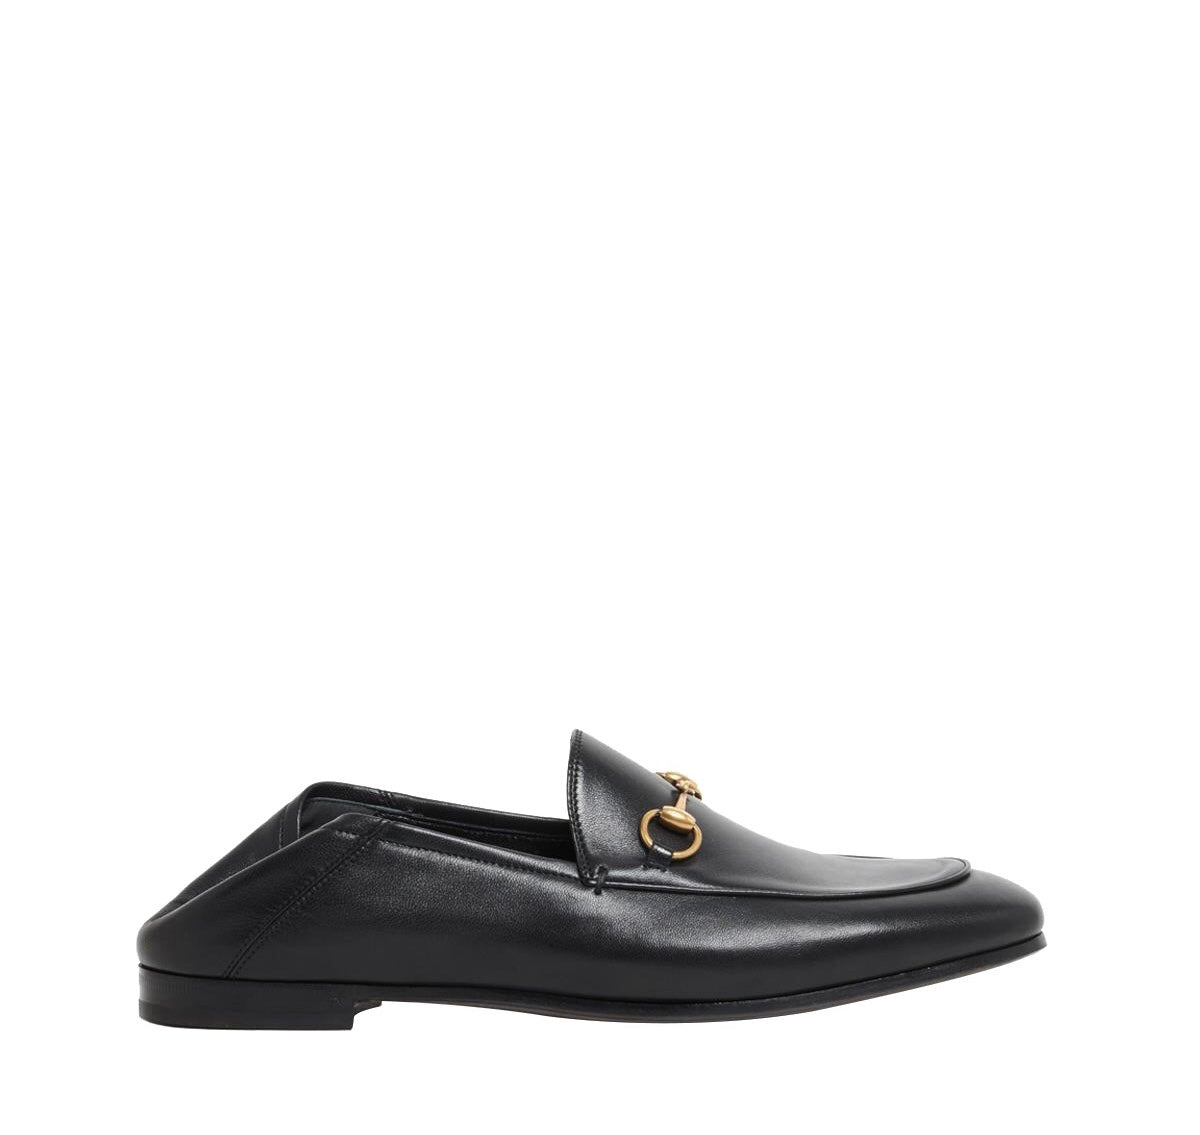 Gucci Horsebit Leather Loafers